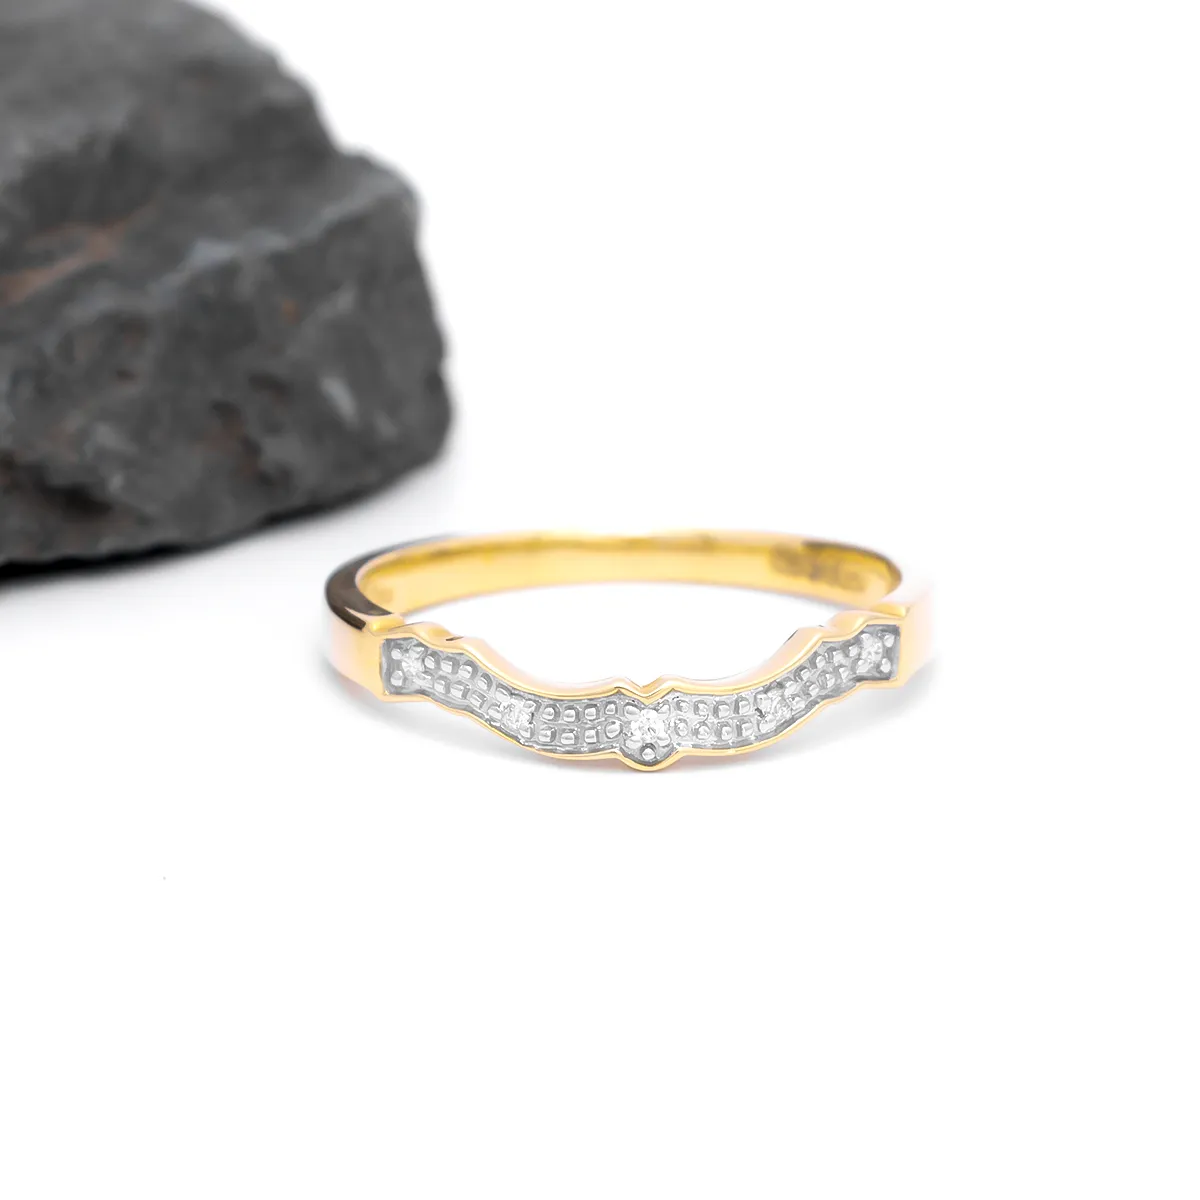 Shaped Wedding Band to Match Claddagh Engagement Ring - Yellow Gold...